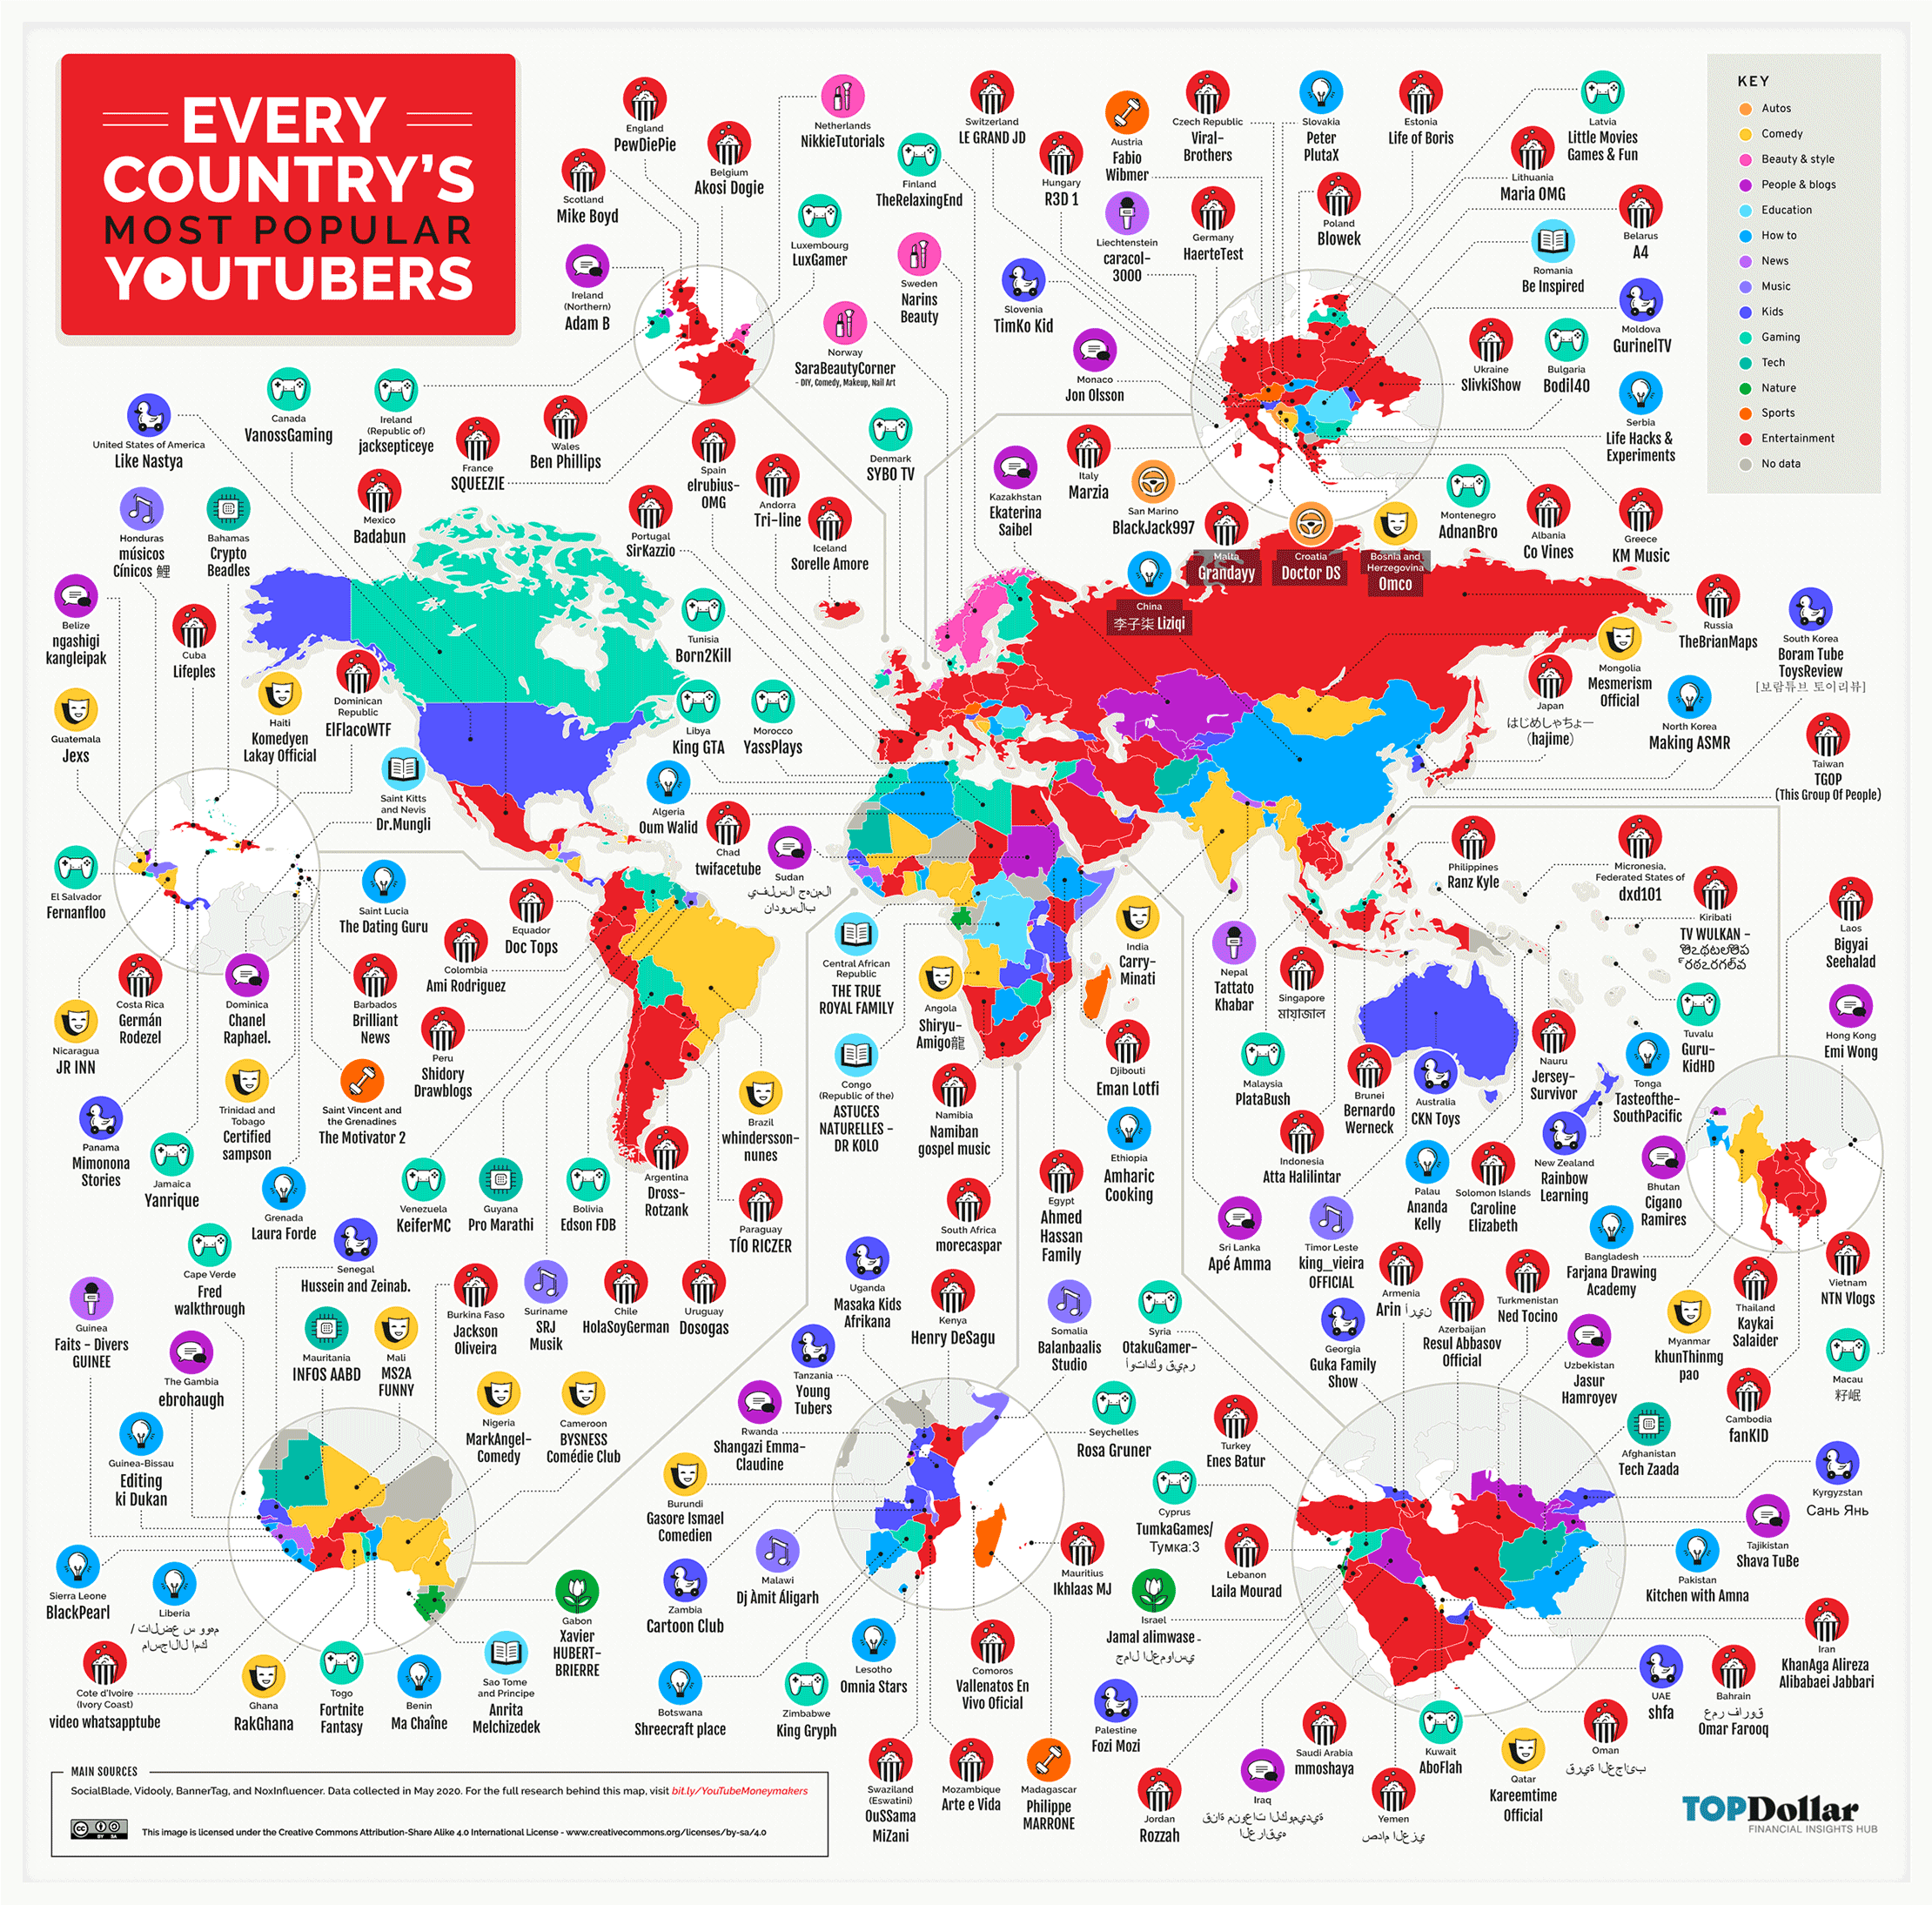 Who's the Most Popular r in Every Country?